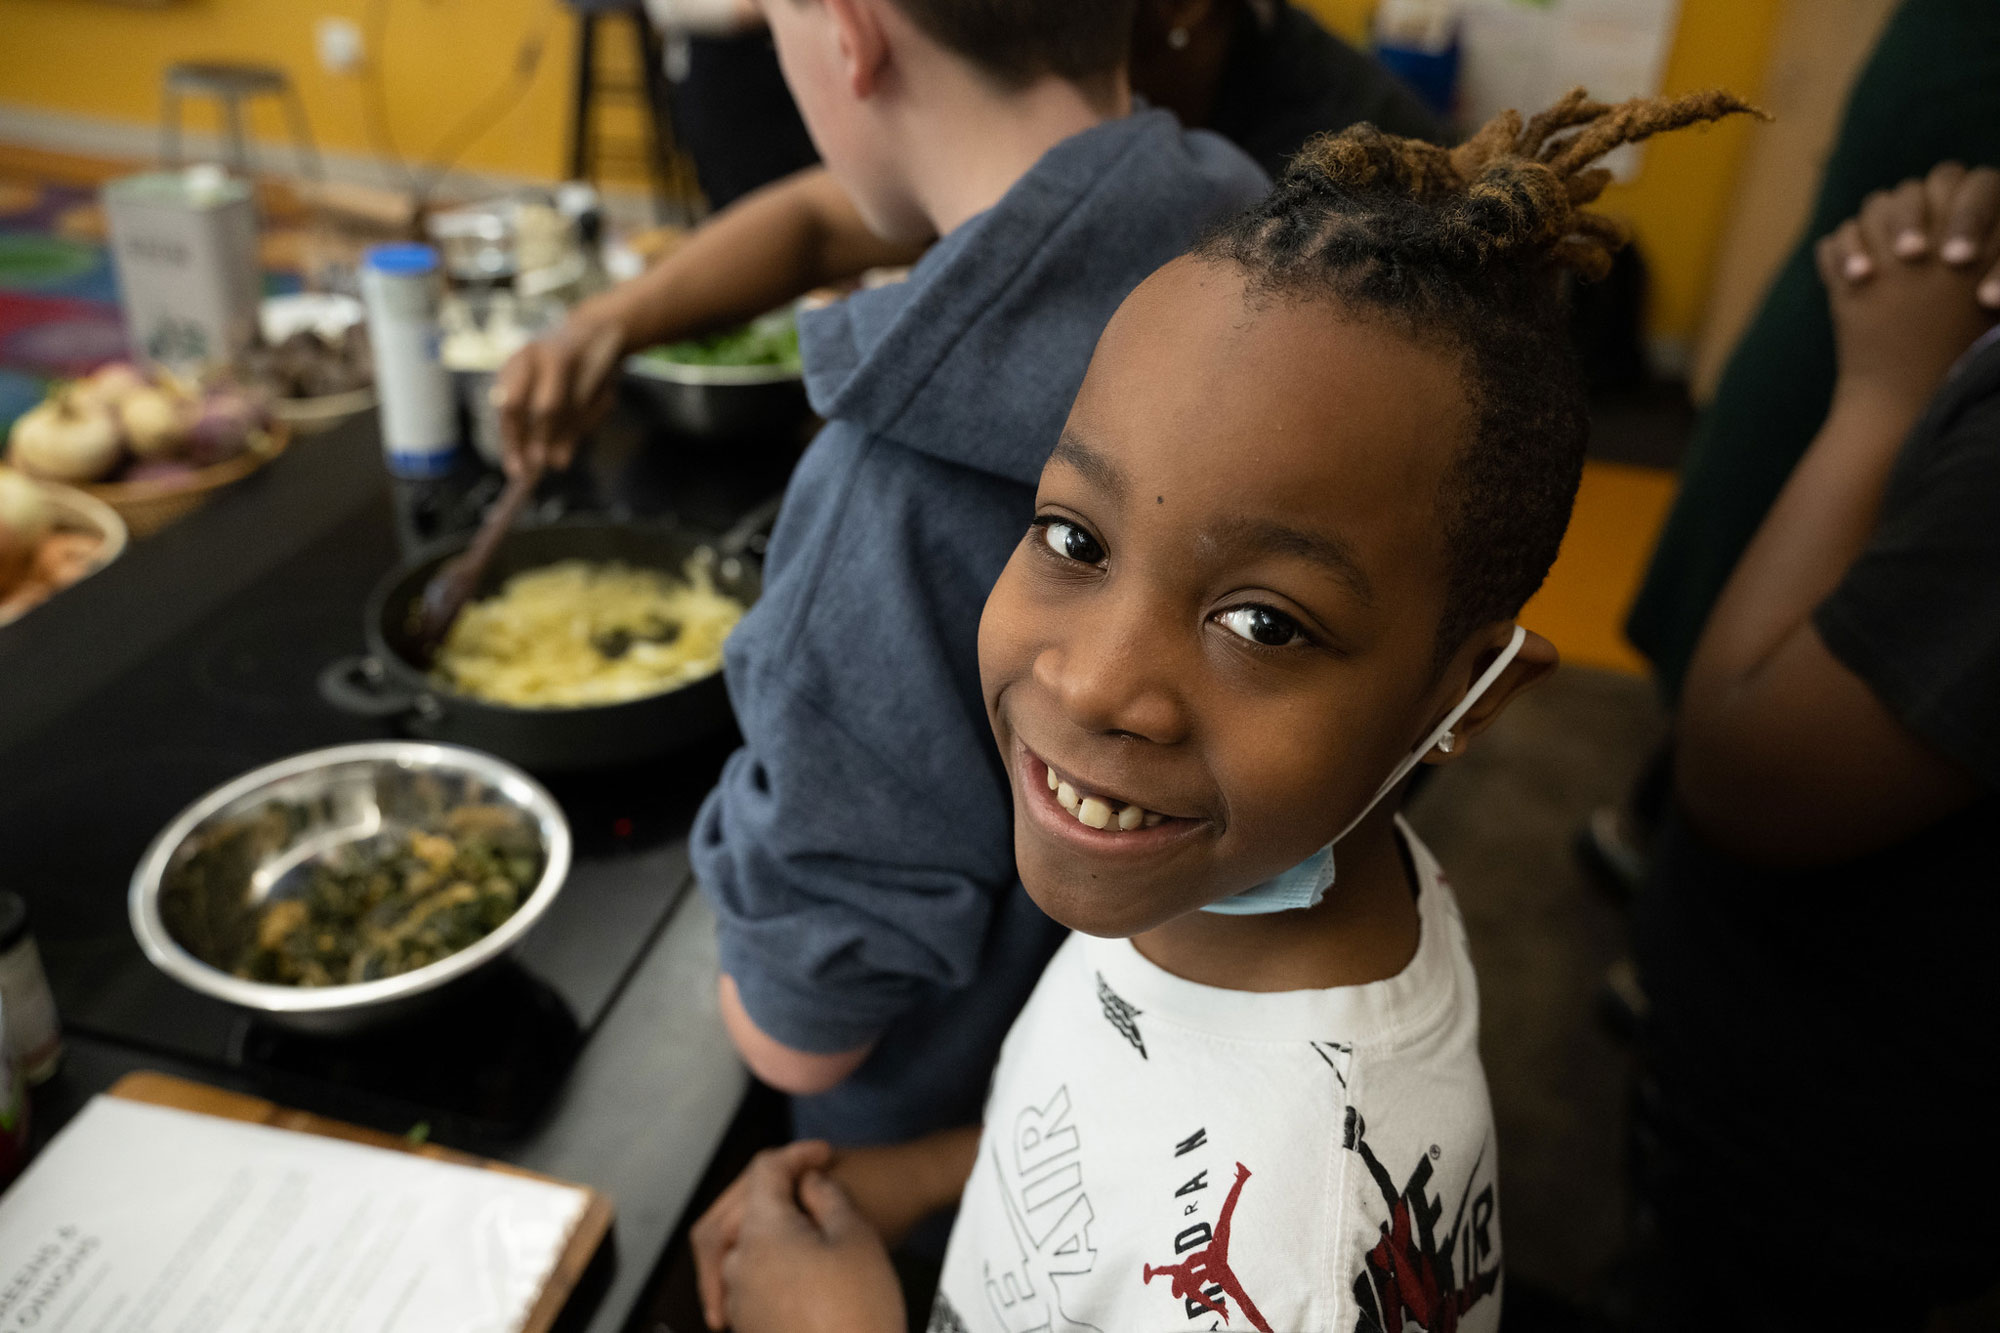 Watkins Elementary School 5th grade student smiles as he learns how to cook collard greens